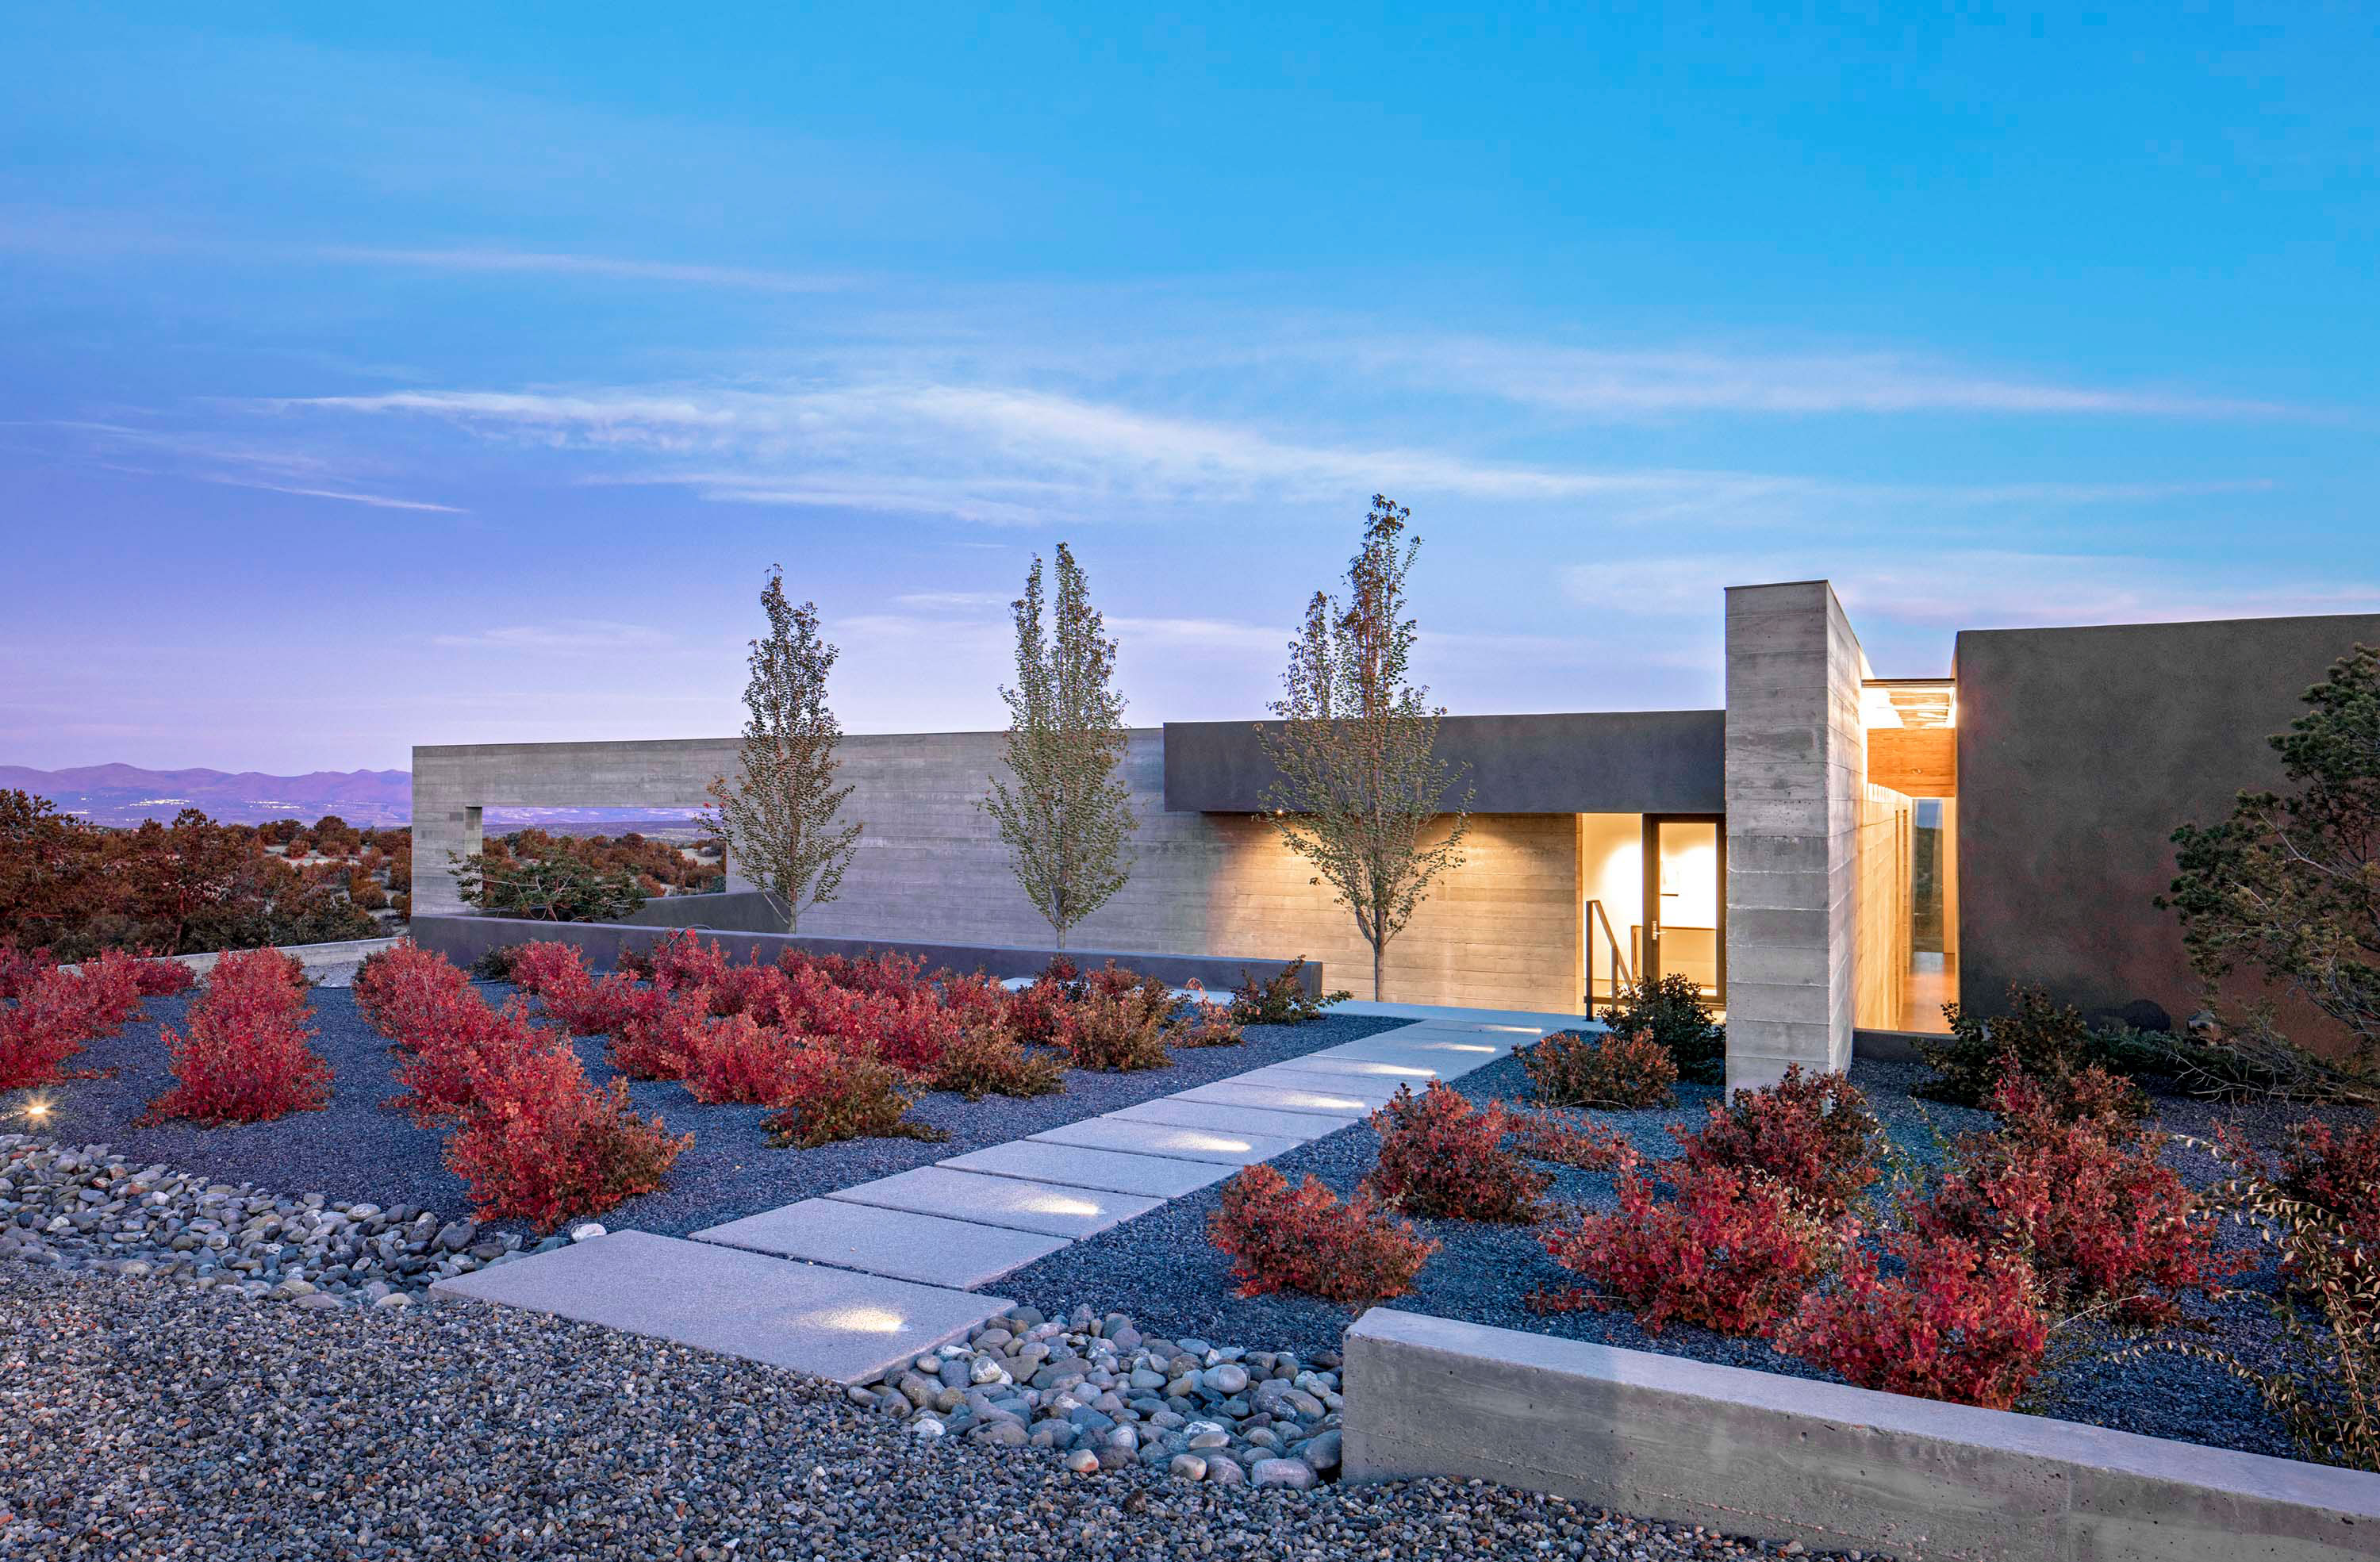 Exterior photo of the Sangre de Cristo House by Specht Novak Architects. Shot by Casey Dunn, featuring a welcoming entryway to the concrete home and its surrounding garden.